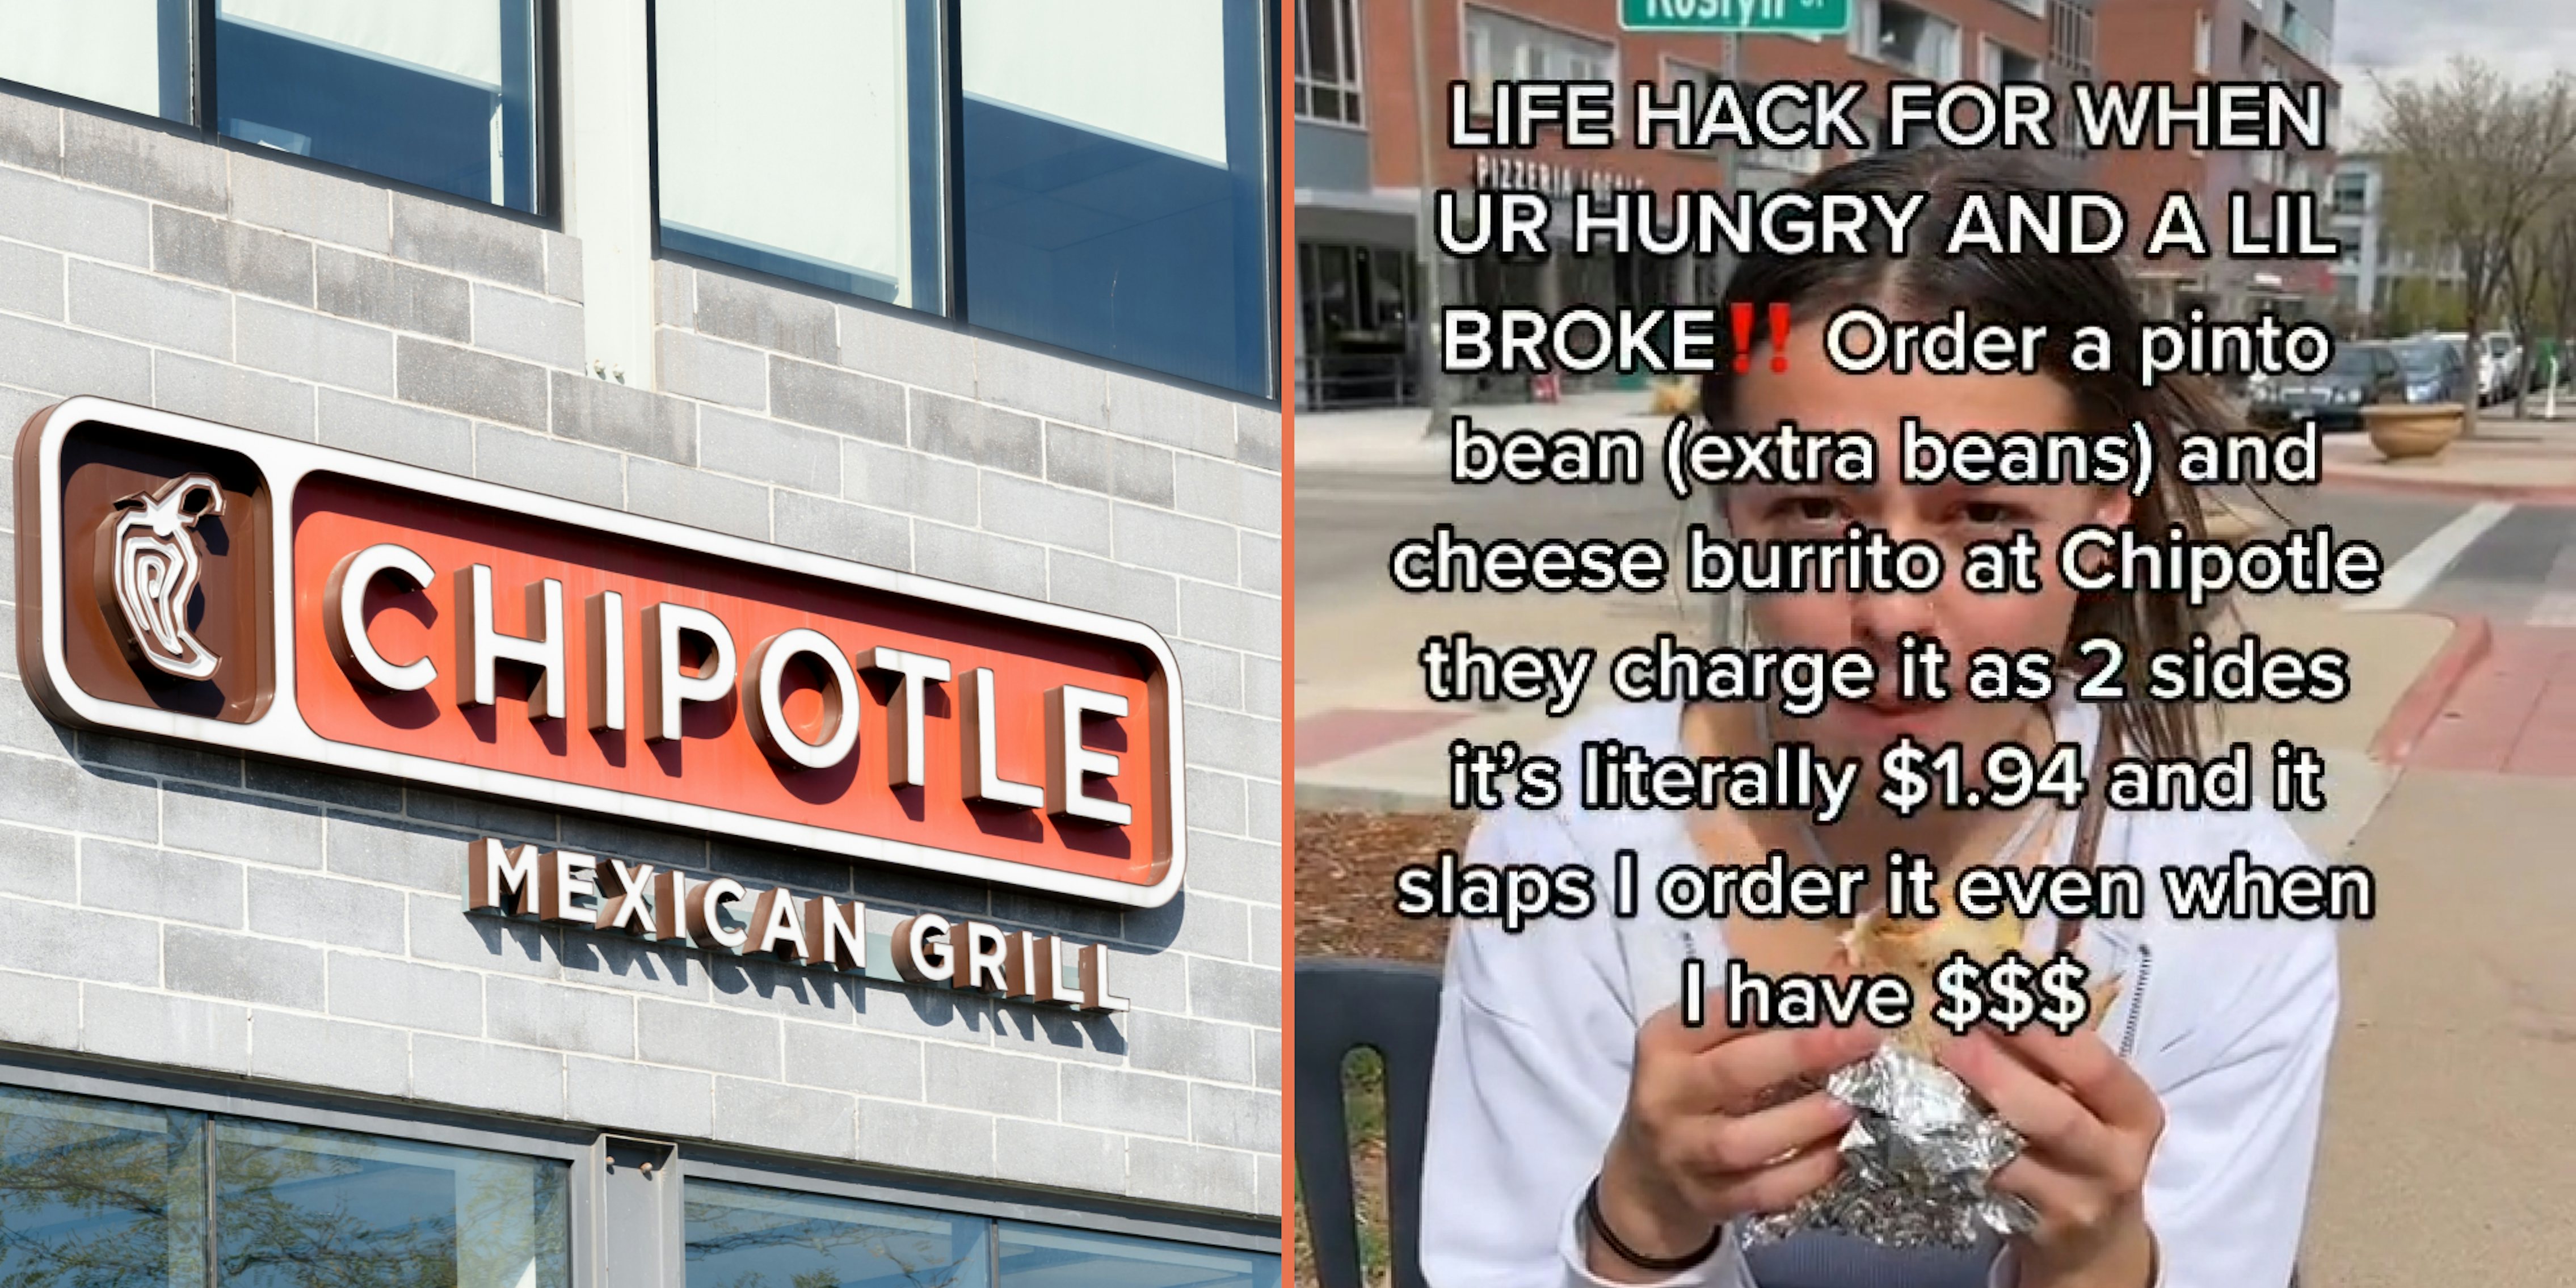 Chipotle Mexican Grill sign on building (l) Woman on bench eating burrito caption 'LIFE HACK FOR WHEN UR HUNGRY AND A LIL BROKE Order a pinto bean (extra beans) and cheese burrito at Chipotle they charge it as 2 sides it's literally $1.94 and it slaps I order it even when I have $$$' (r)